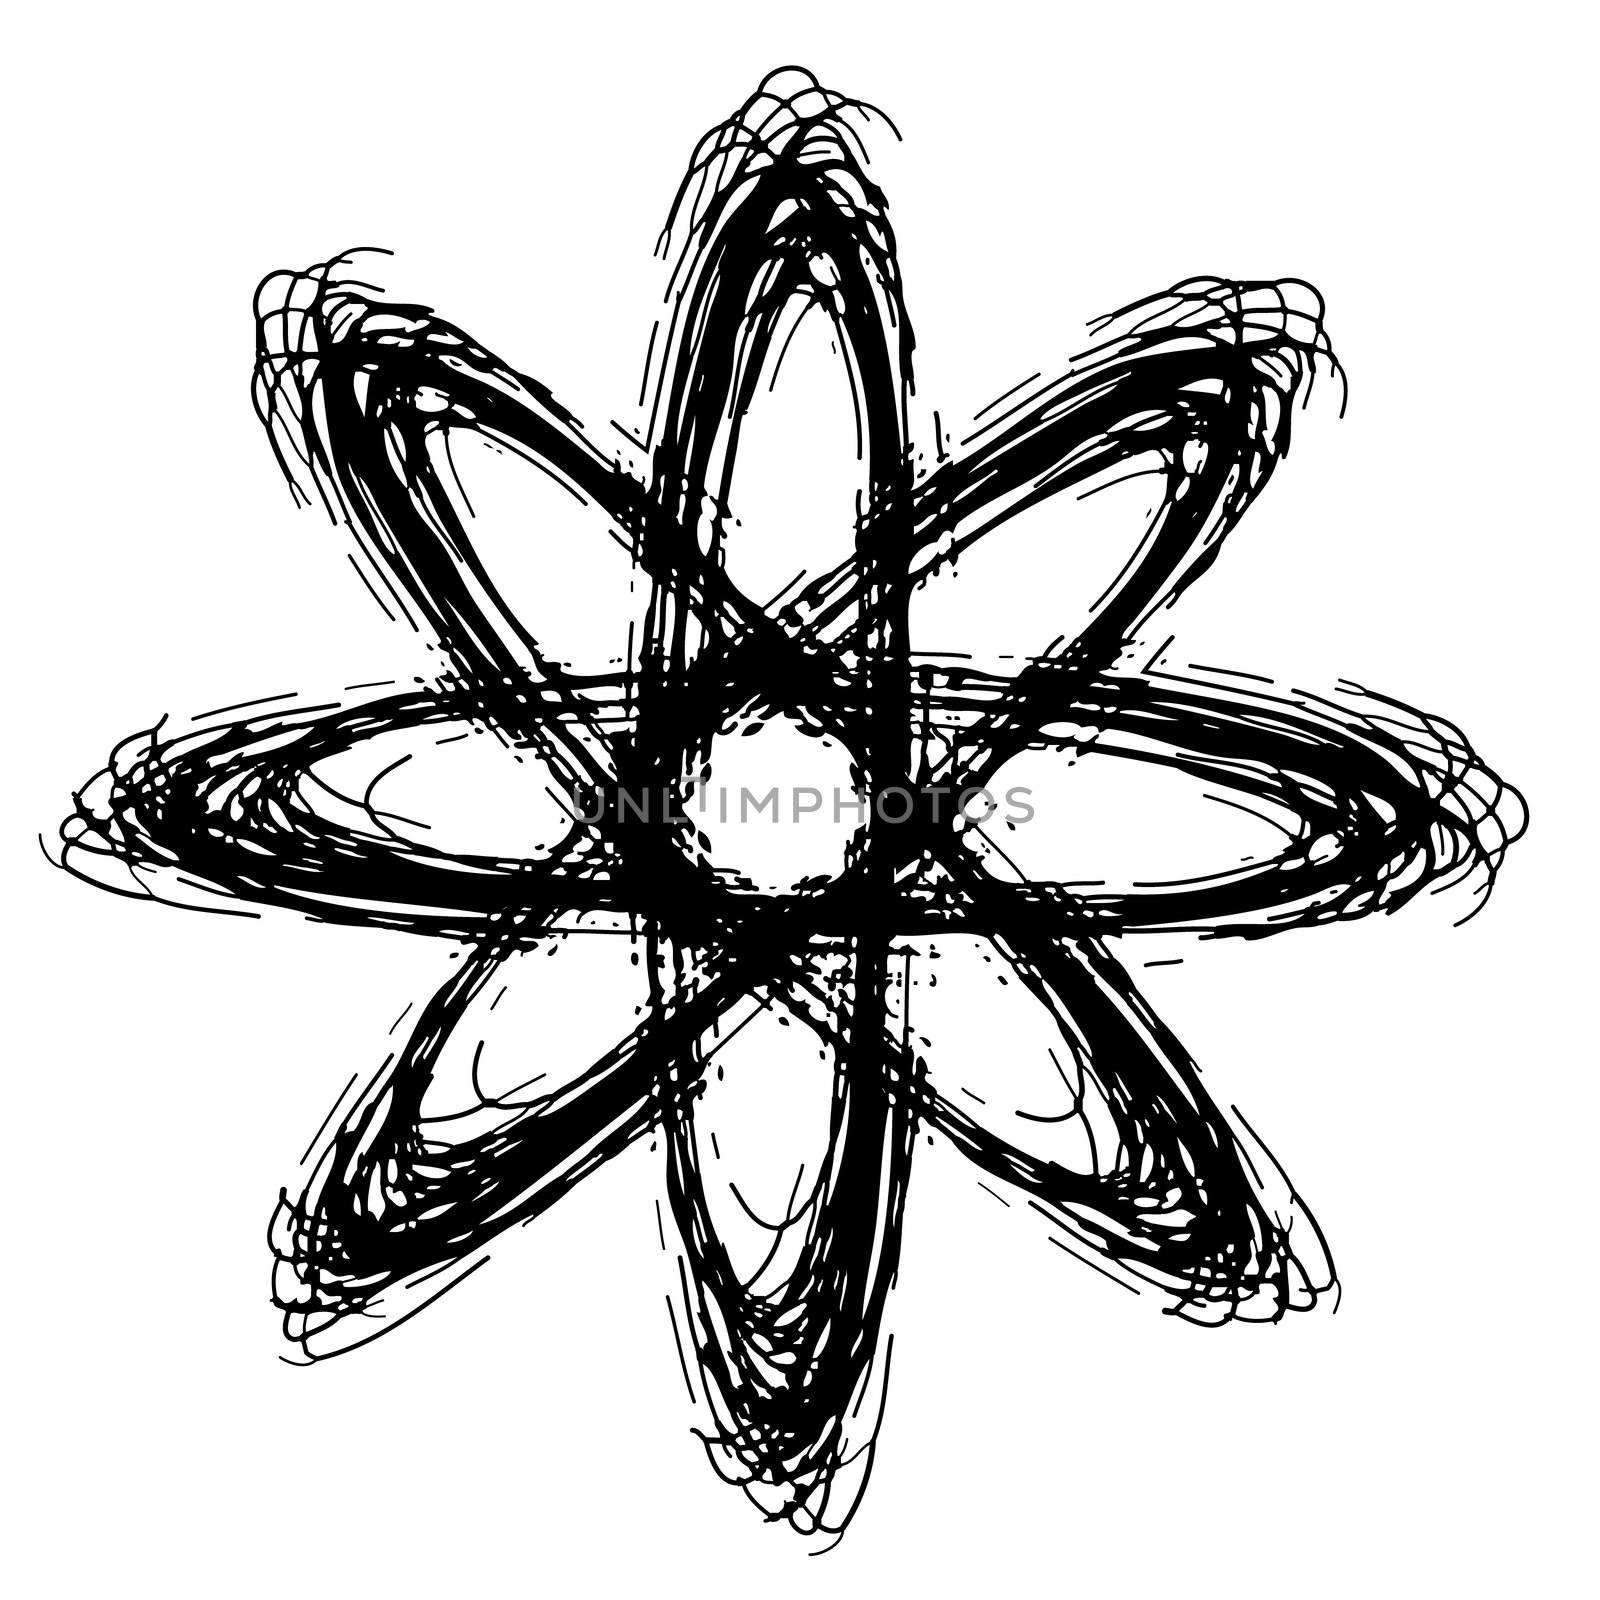 Hand drawing of atom shape doodle by pencil . use for background .